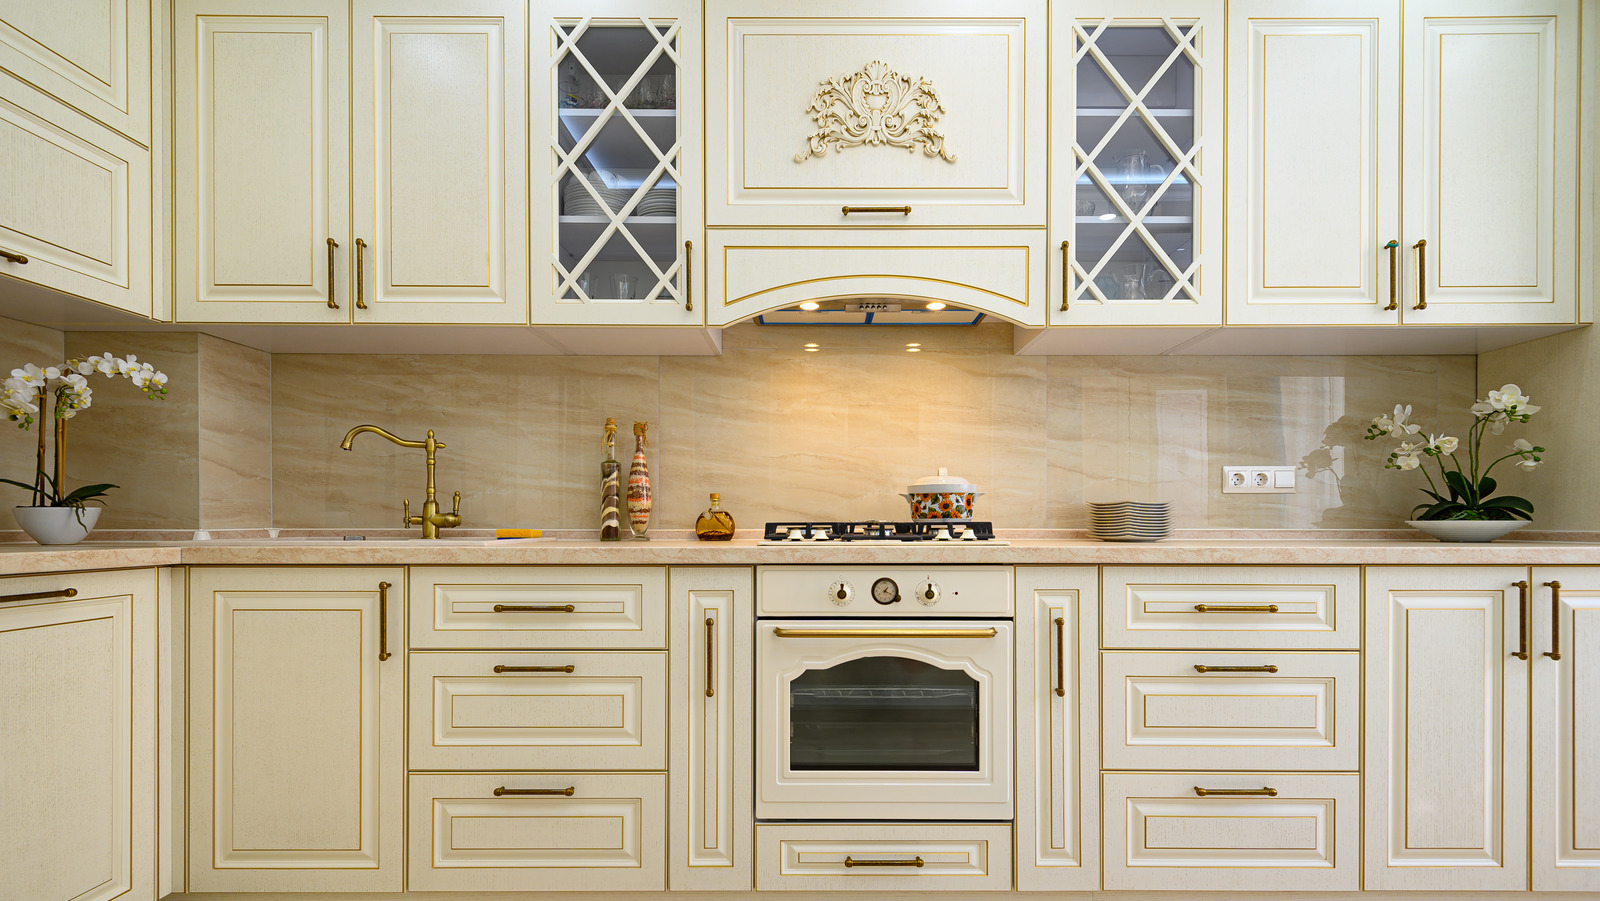 https://www.housedigest.com/img/gallery/do-your-kitchen-cabinets-need-to-be-symmetrical/l-intro-1673776874.jpg